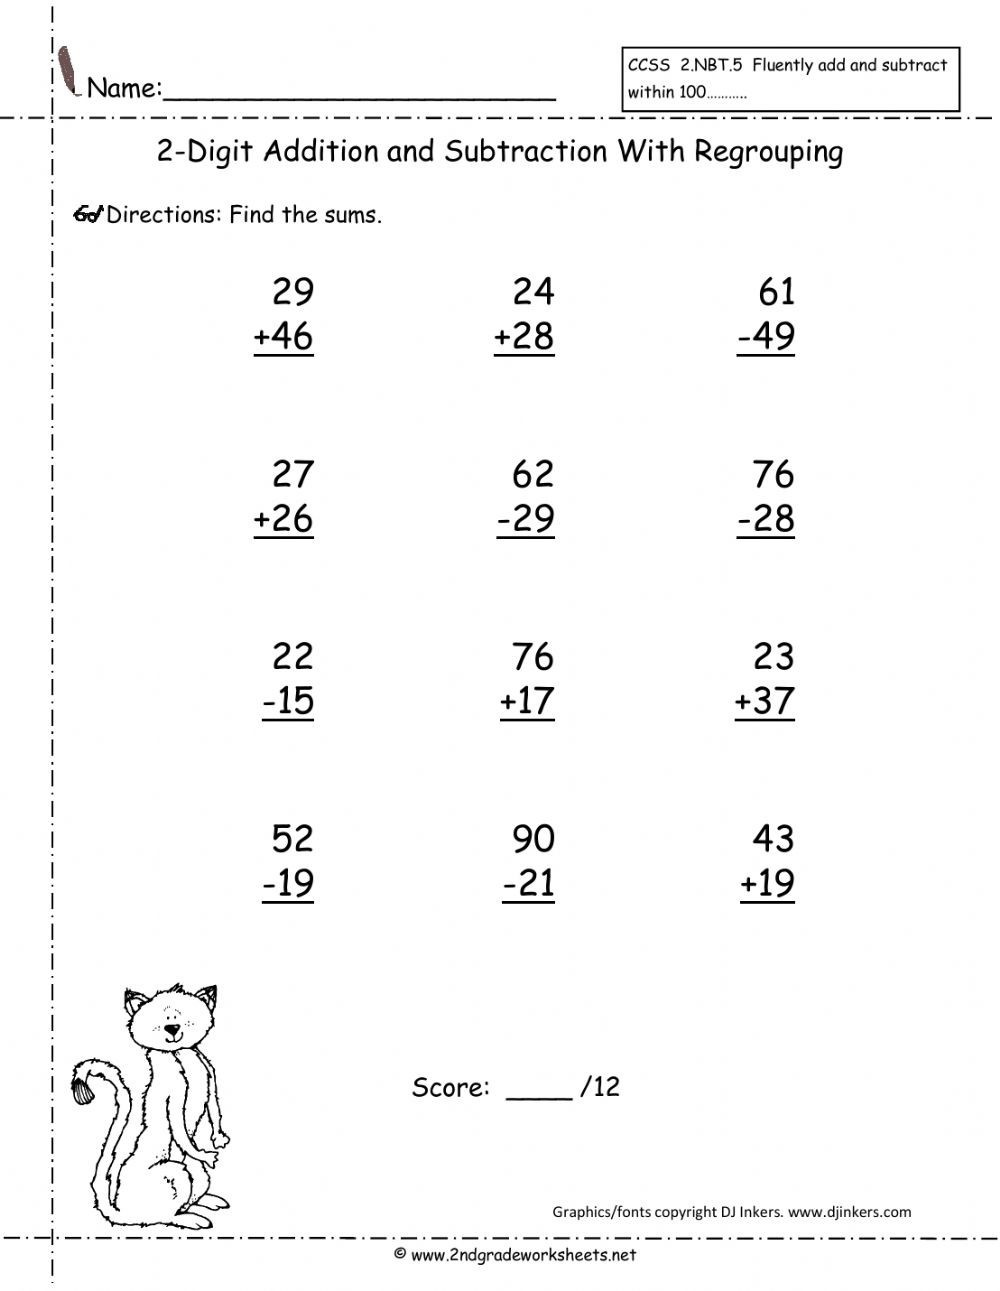 2-digit-addition-and-subtraction-with-regrouping-worksheets-worksheet